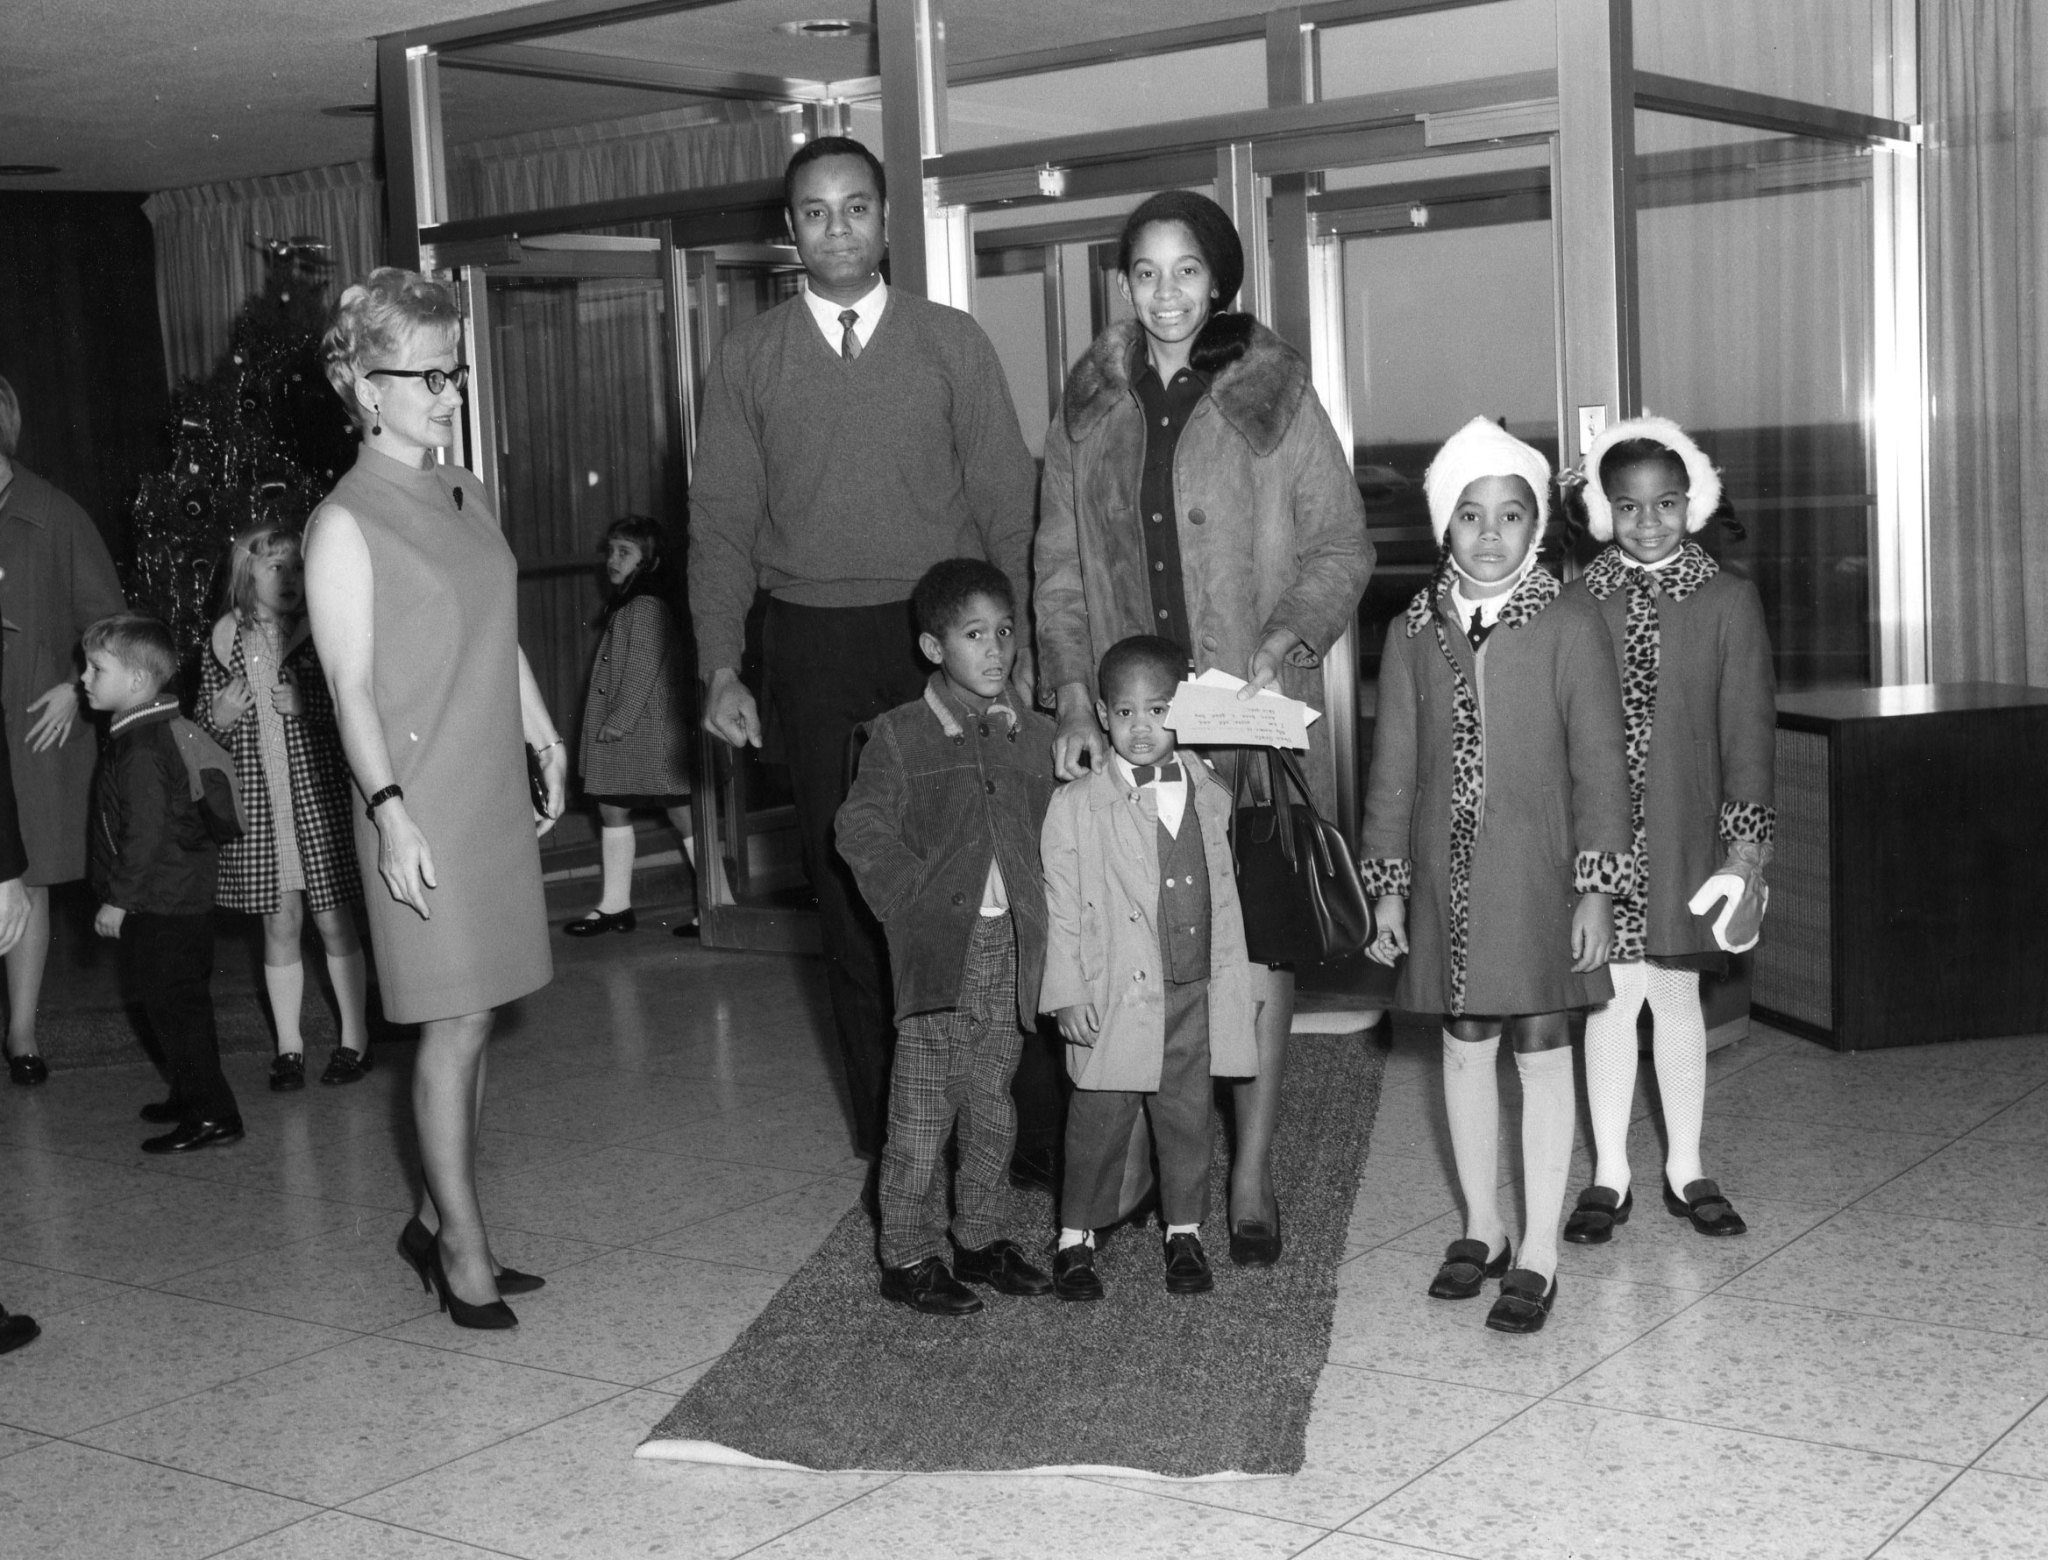 Father, mother, and four children stand in building lobby